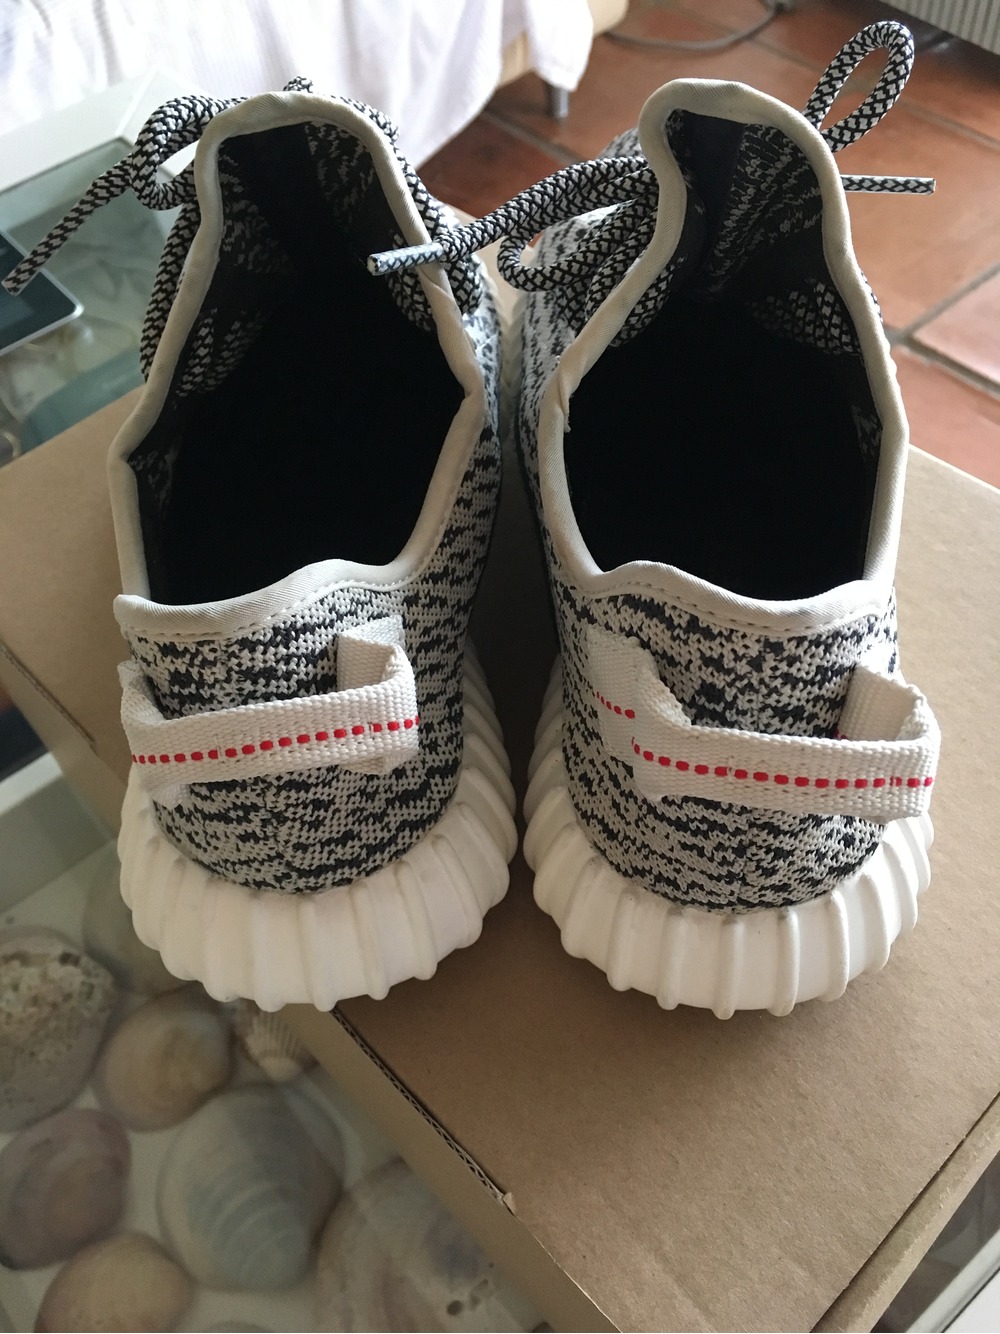 Yeezy Boost 350 Turtle Dove Fashion Sneakers